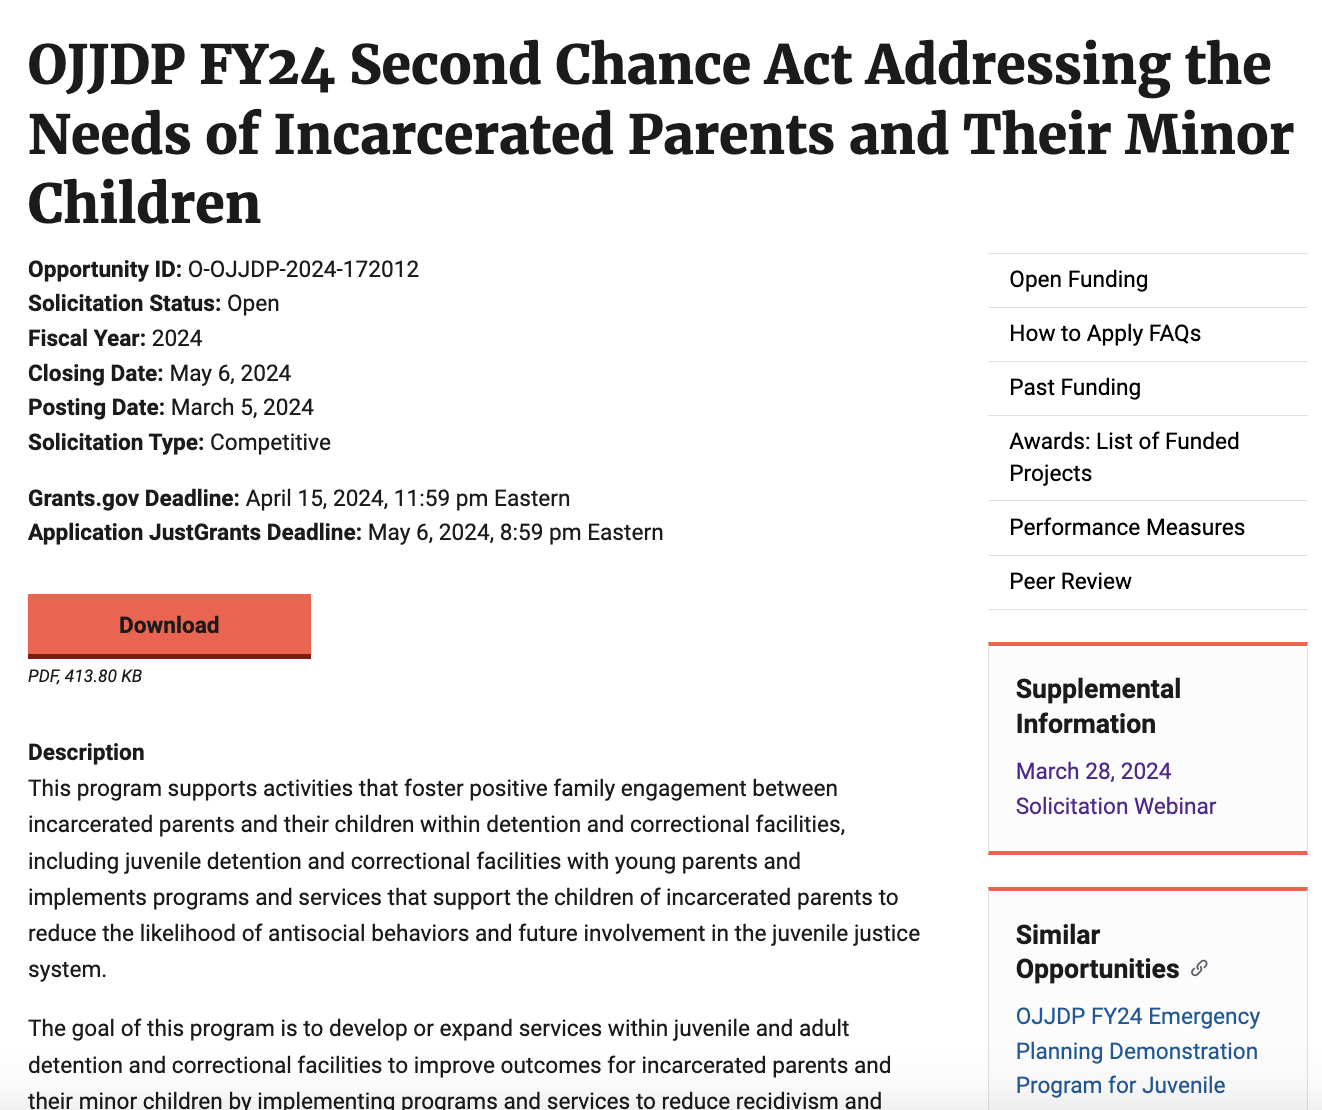 OJJDP FY24 Second Chance Act Addressing the Needs of Incarcerated Parents and Their Minor Children